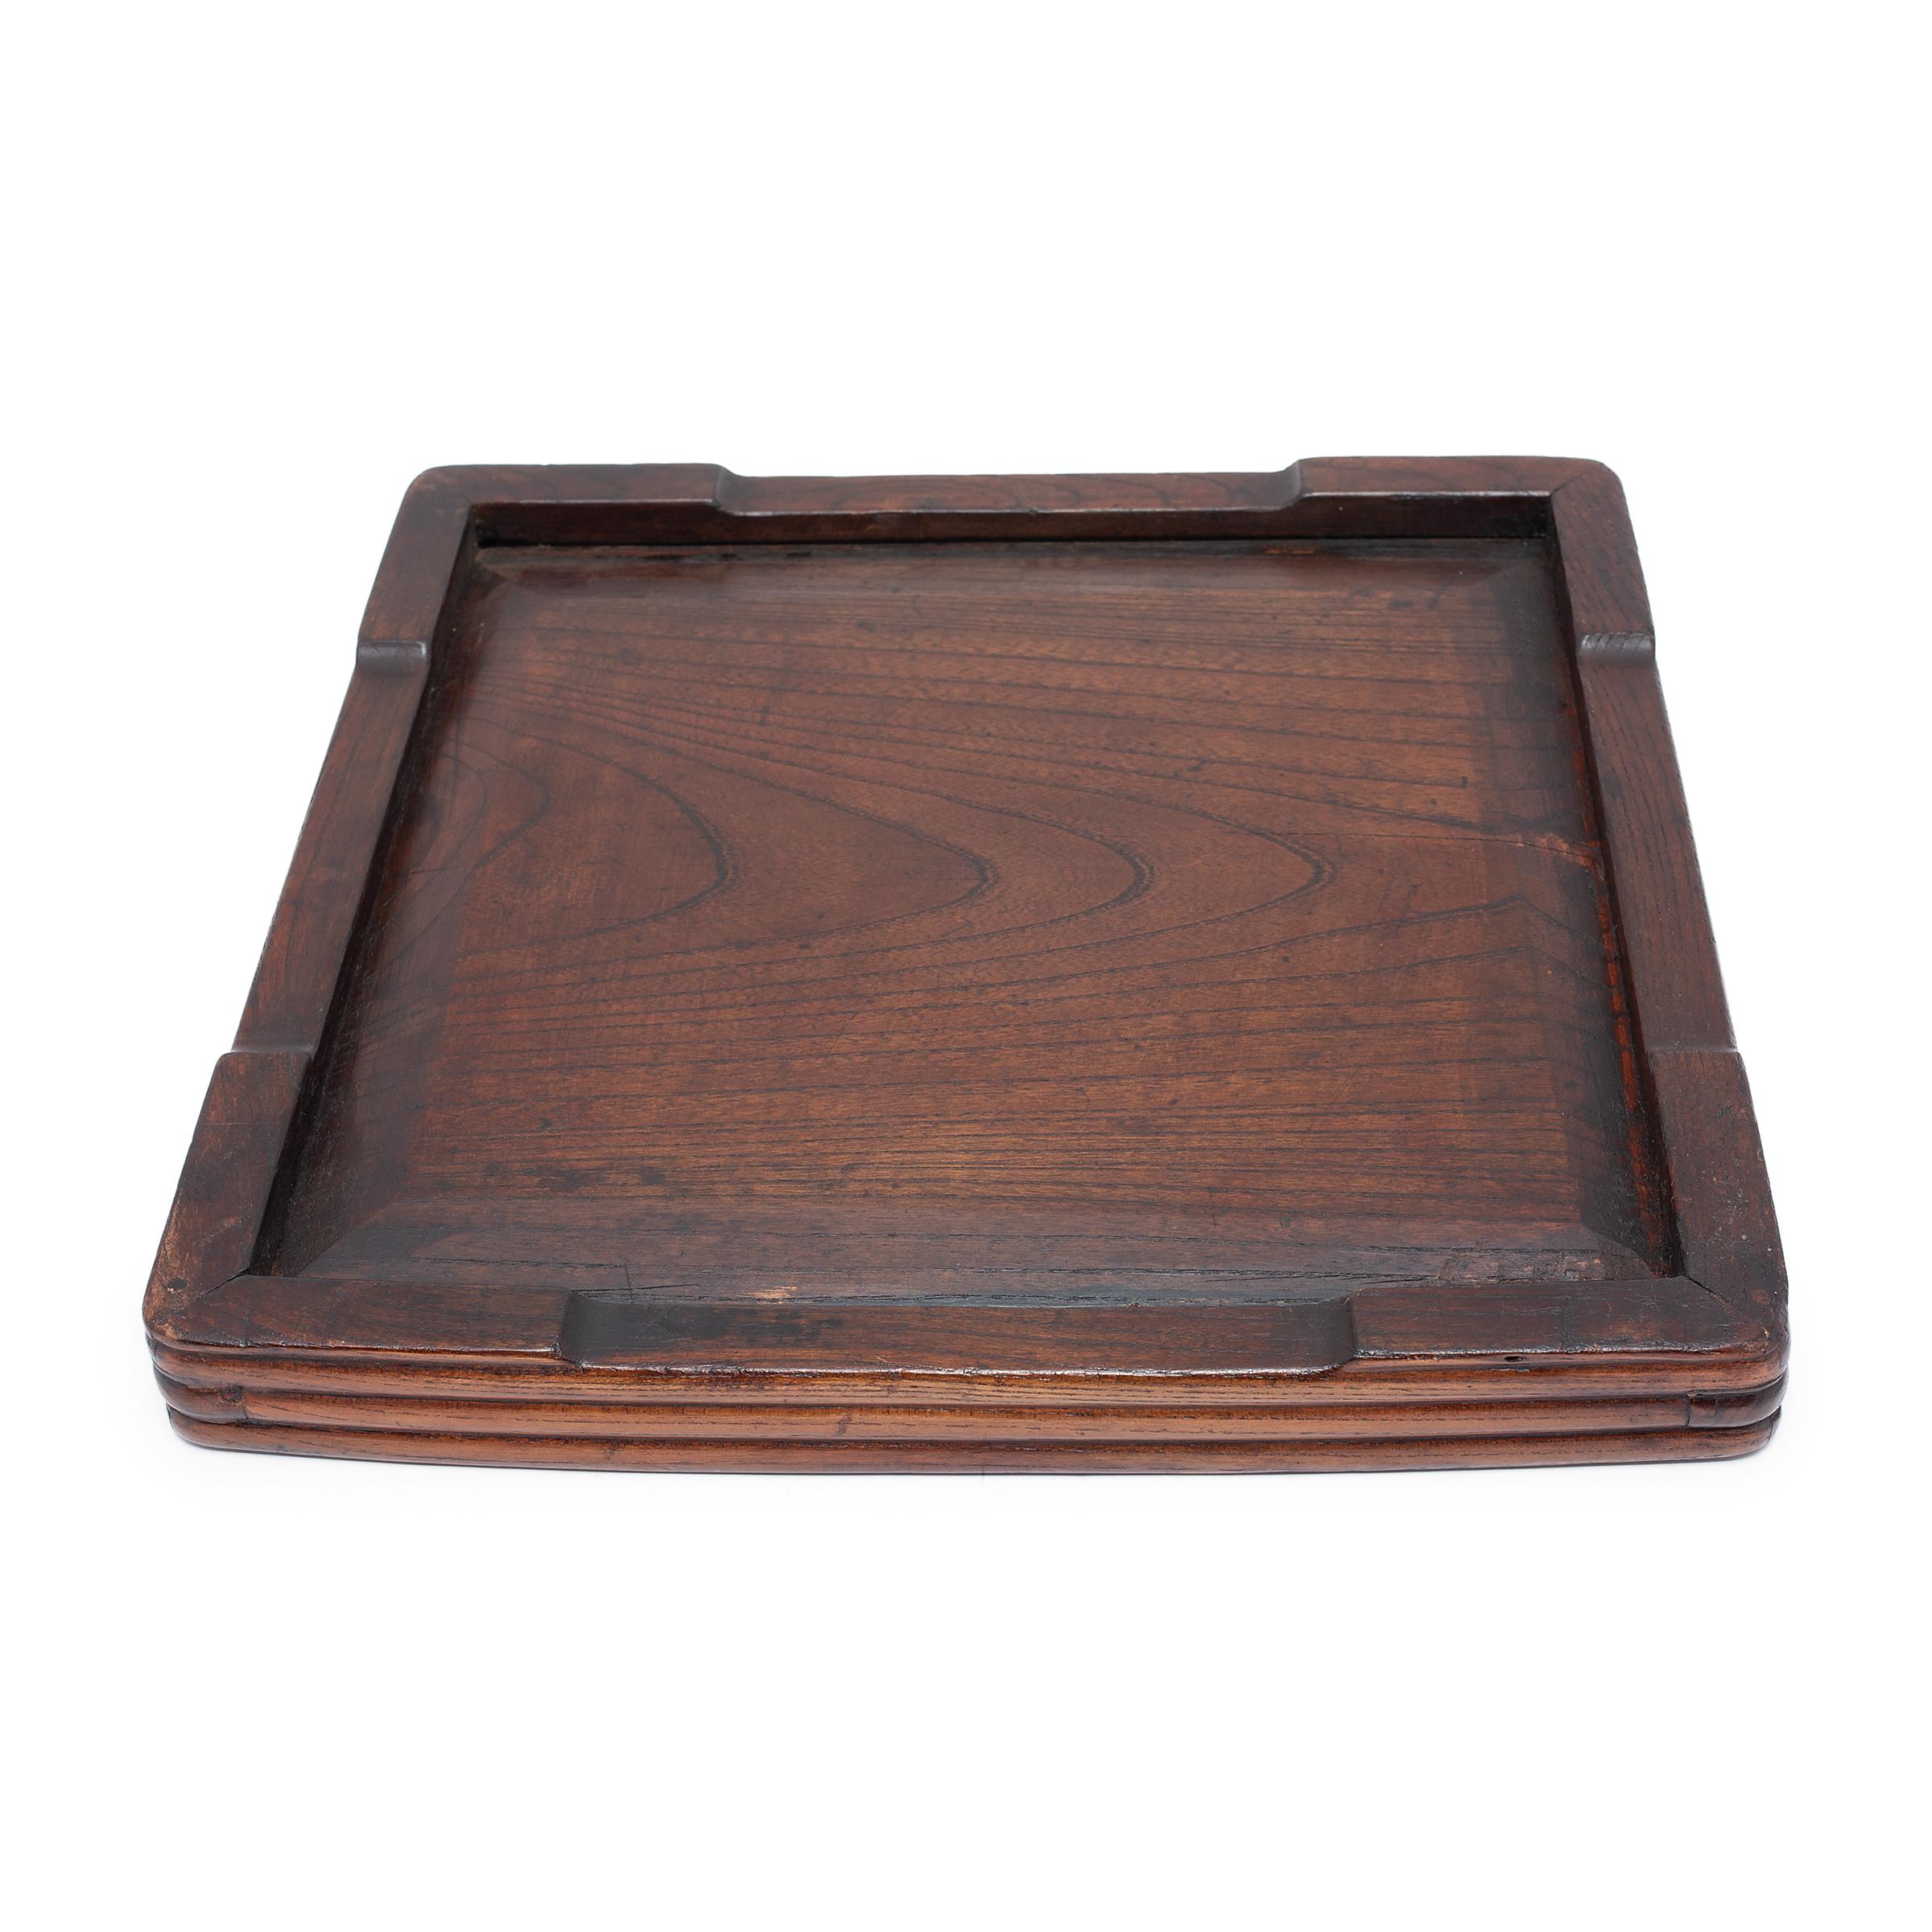 Chinese Tea Tray with Ridged Sides, c. 1900 In Good Condition For Sale In Chicago, IL